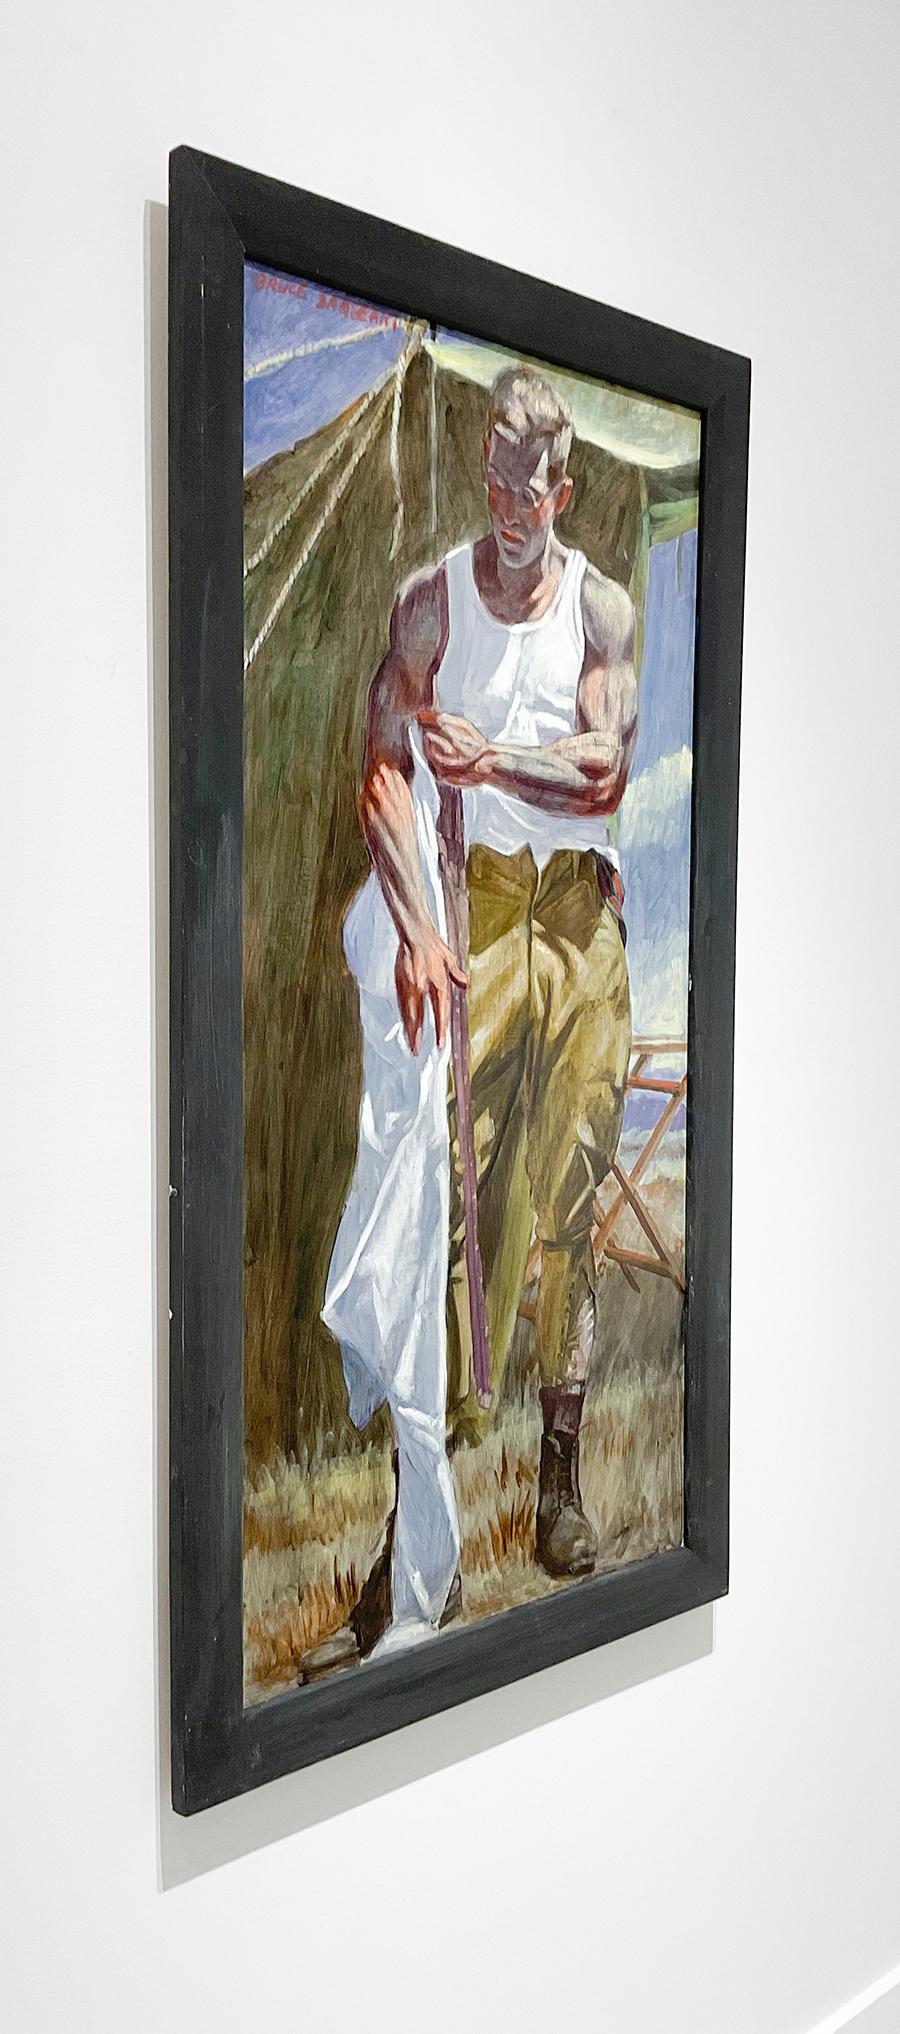 Academic style figurative oil painting on canvas of a young man undressing in a rural camp setting with a mountain landscape in the distance 
